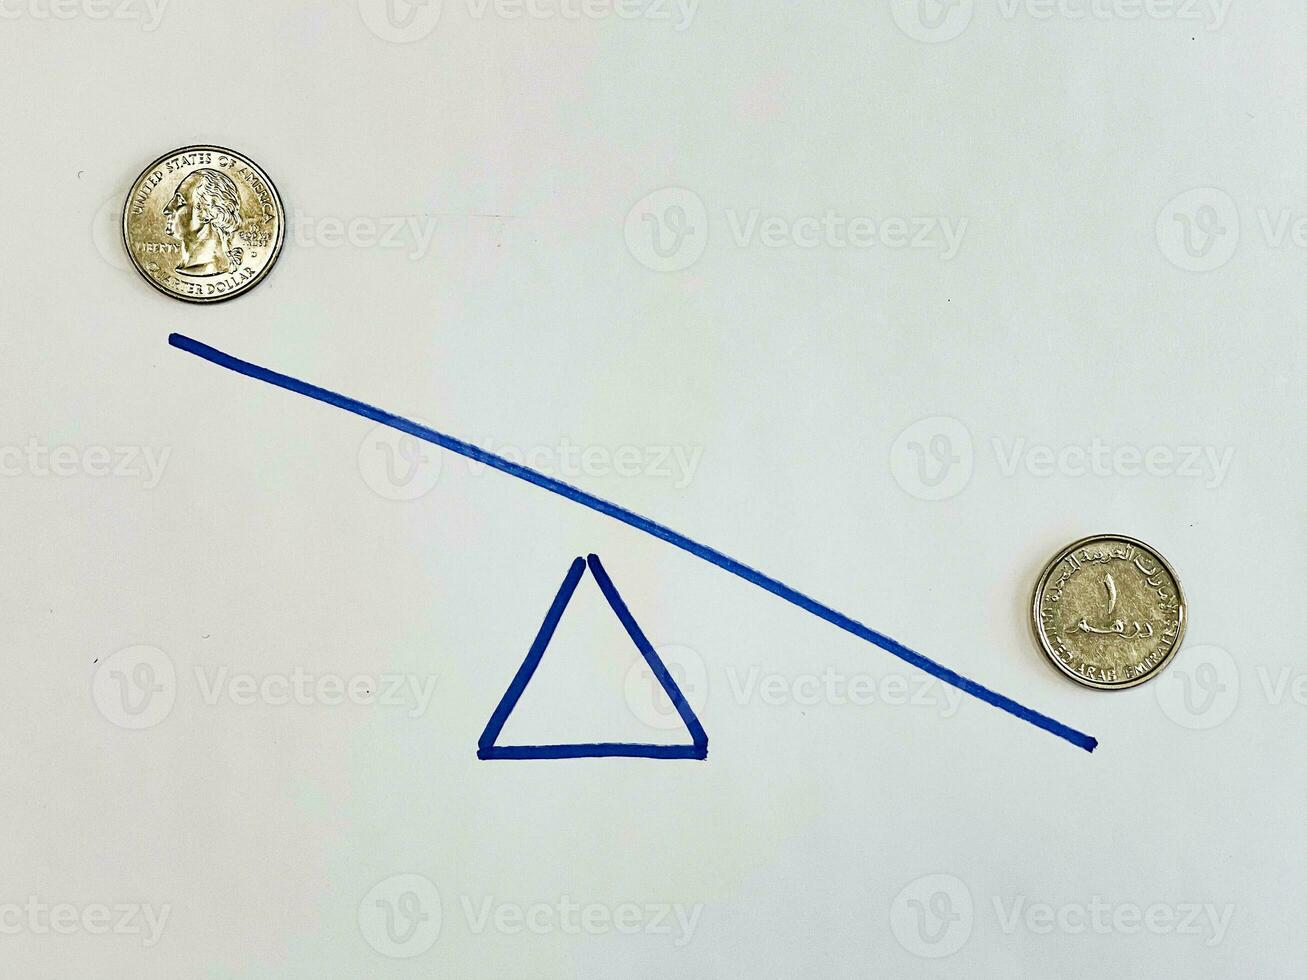 UAE one dirham and us quarter dollar coins on drawn scales photo